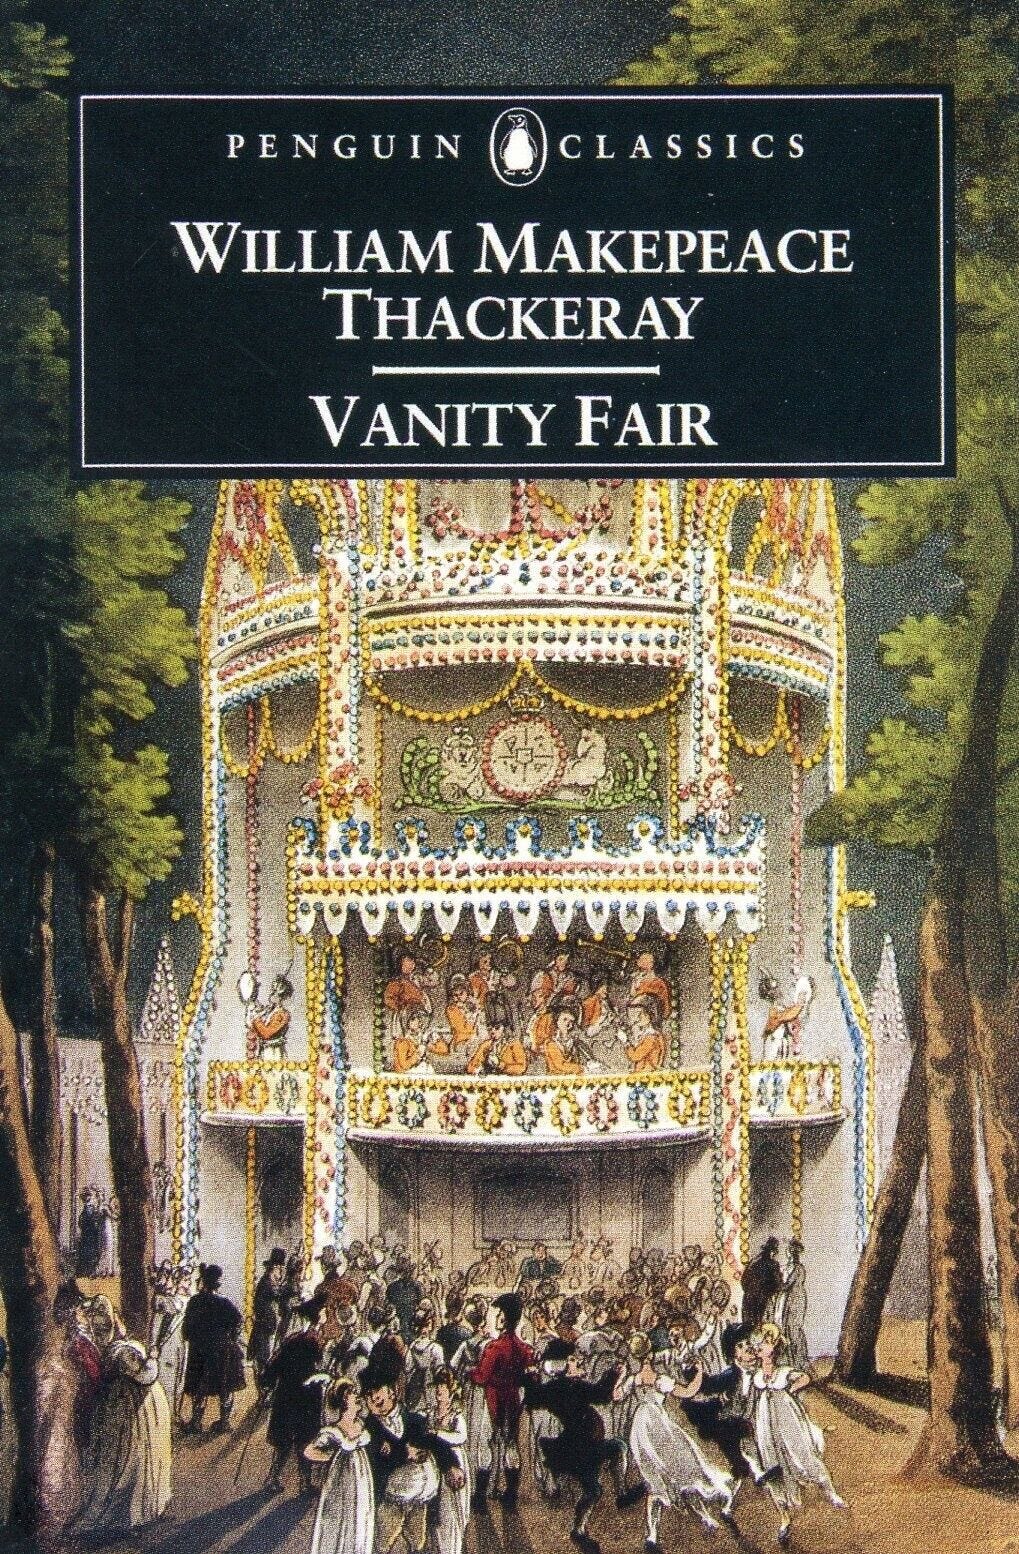 Vanity Fair by William Makepeace Thackeray, Book Cover Art --POSTCARD | eBay